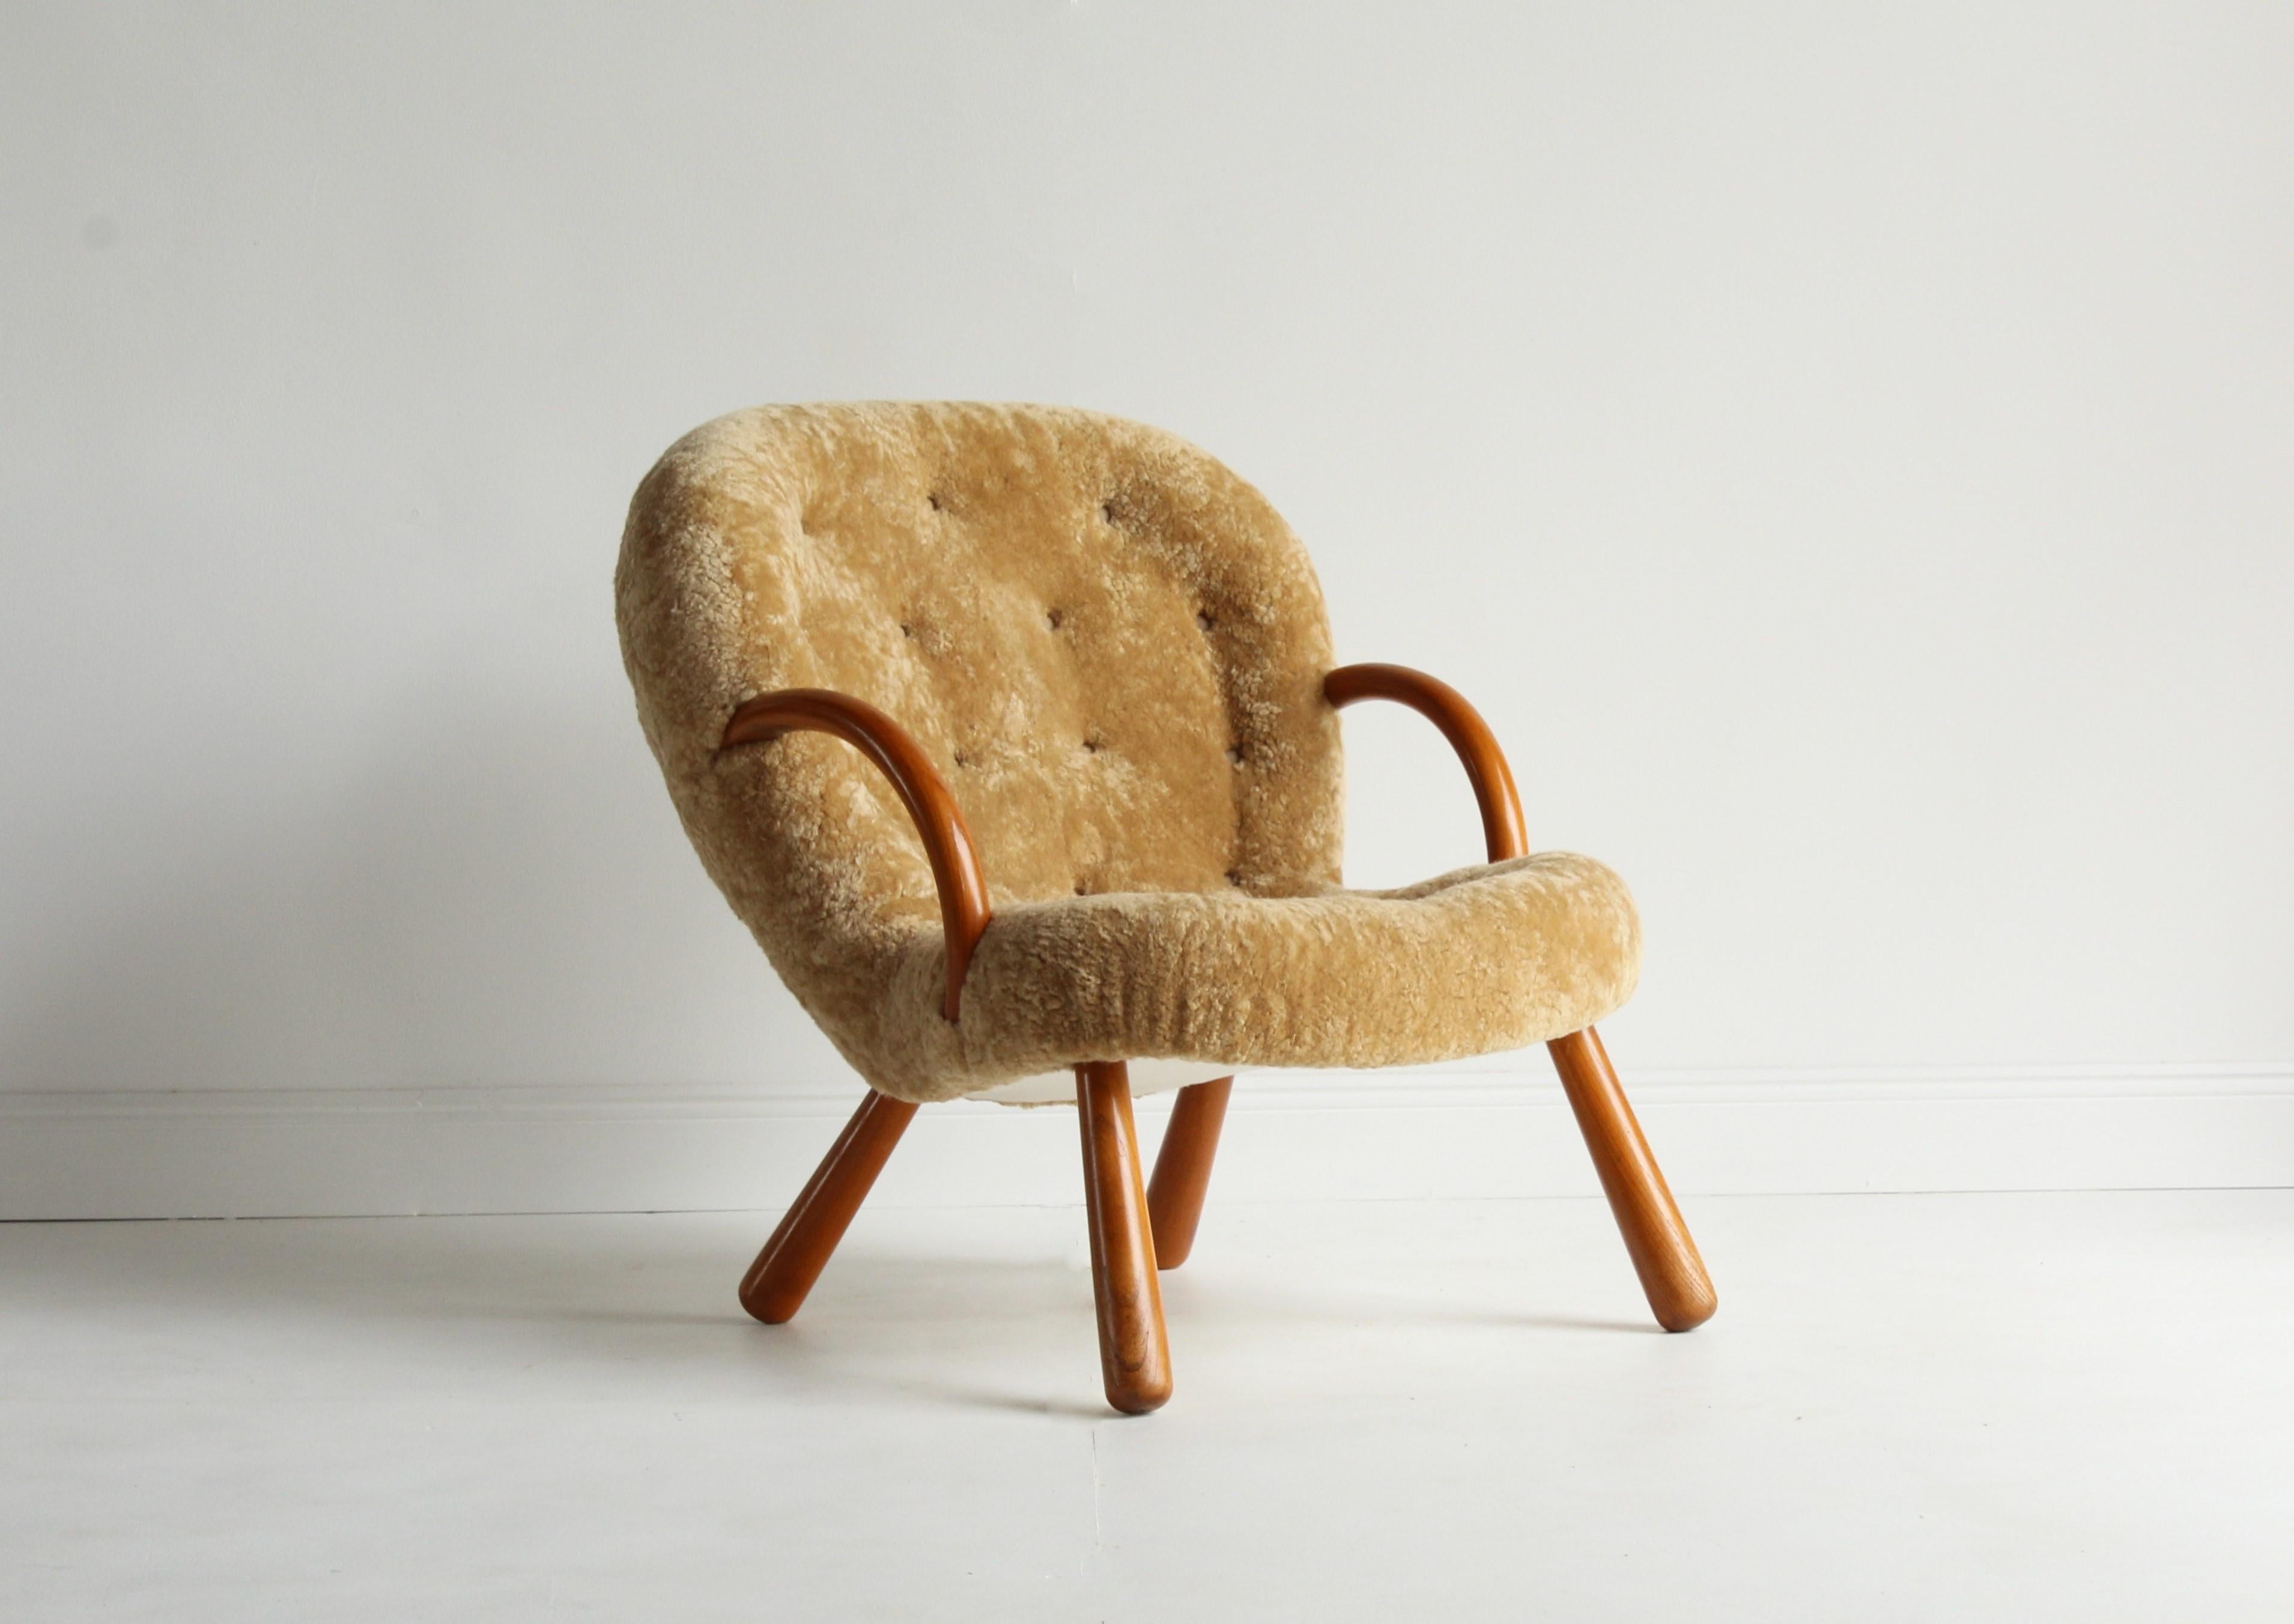 An unusual organic Philip Arctander lounge chair / clam chair. Stained beech frame, upholstered in natural beige sheepskin / lambskin.

Other designers working in the organic style include Peder Moos, Finn Juhl, Carlo Mollino, Gio Ponti and Jean